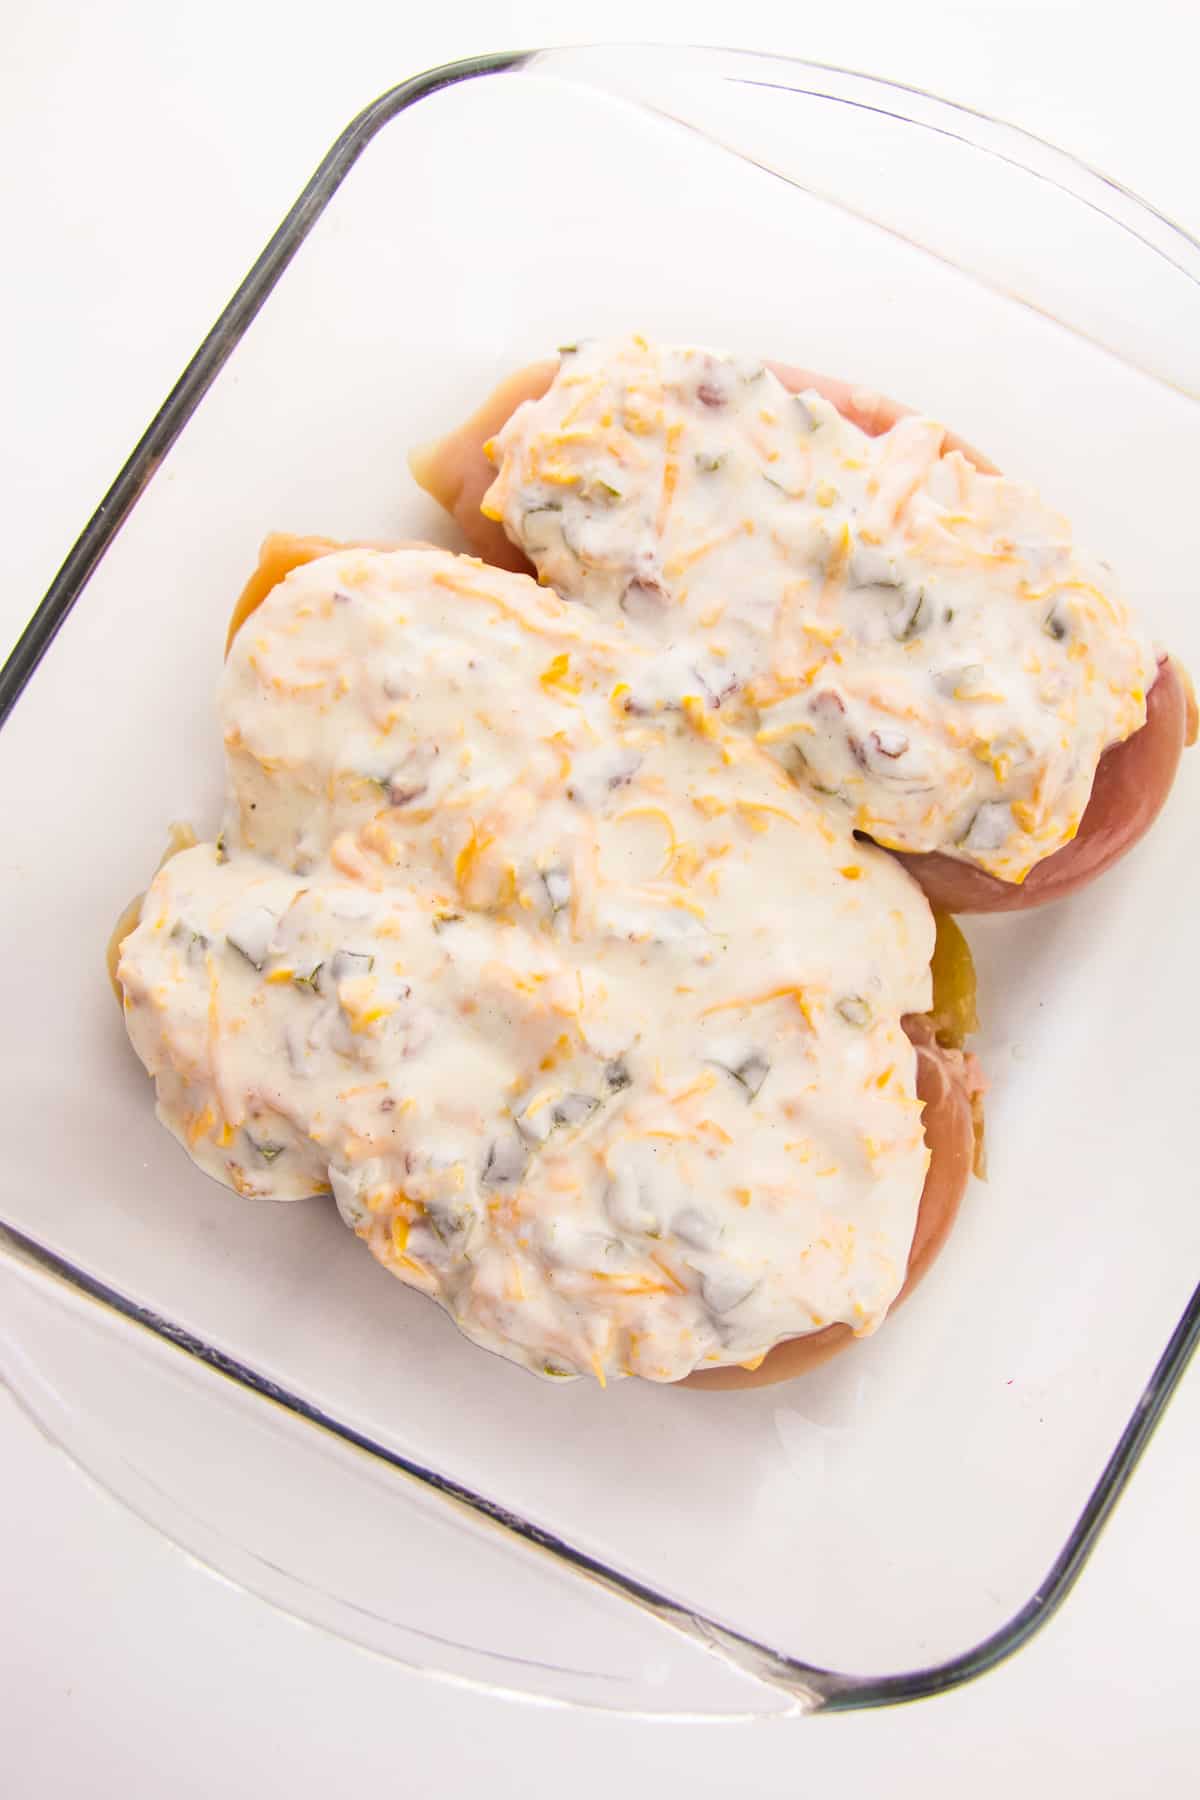 Chicken breasts topped with creamy jalapeno mixture in glass baking dish